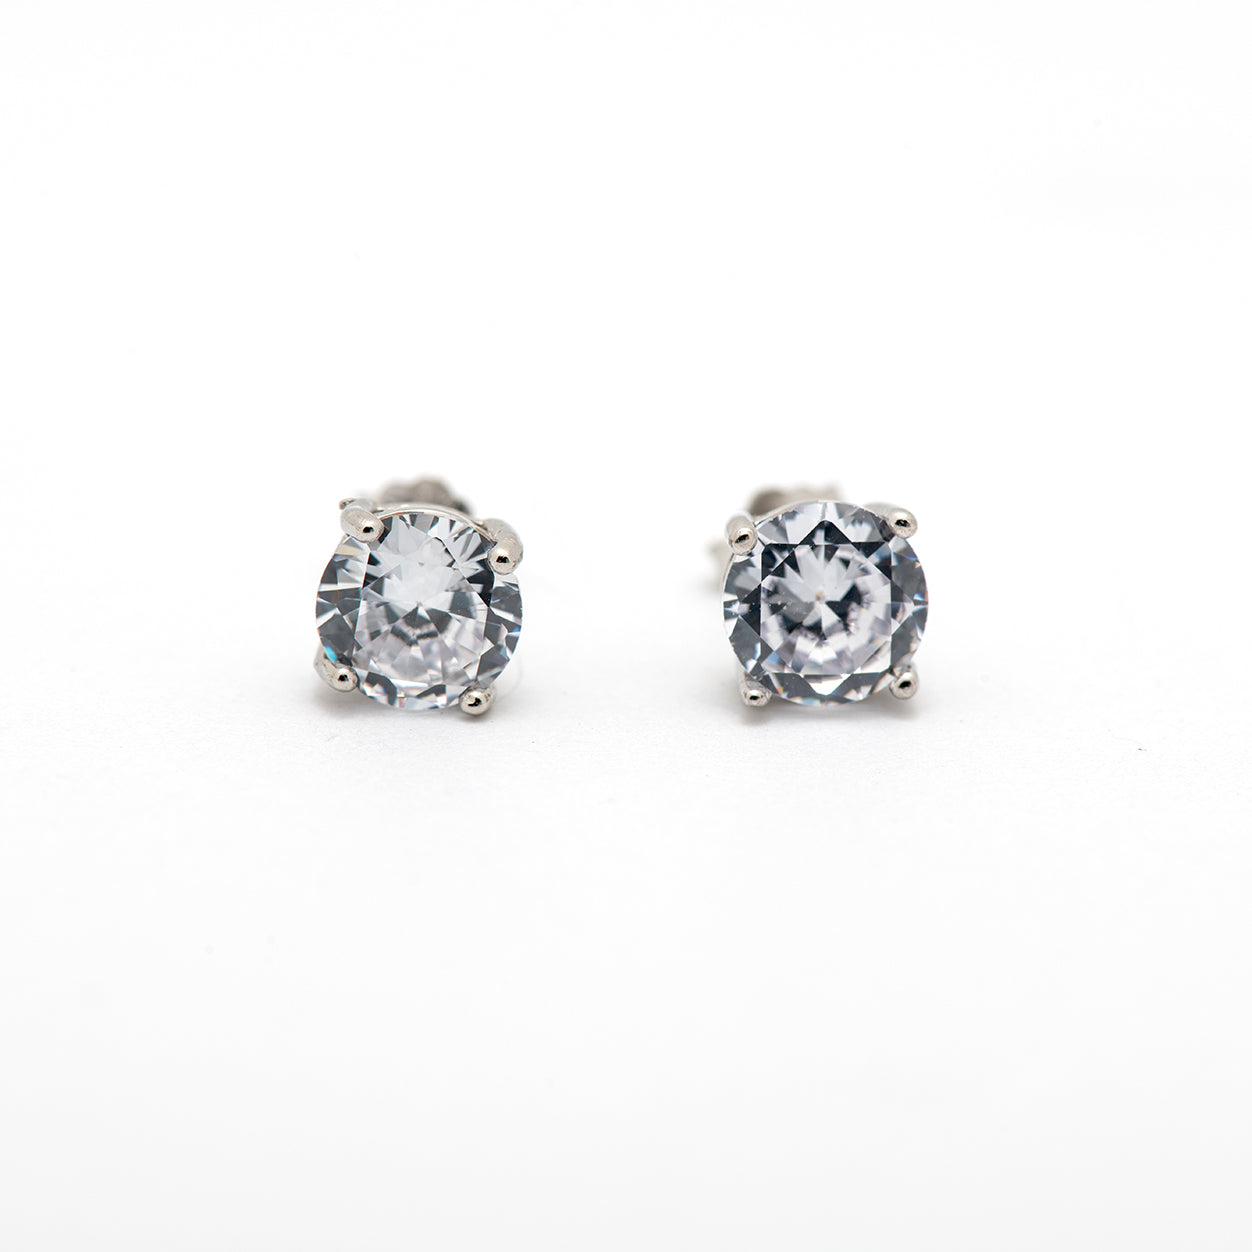 DK-925-116 sterling silver classic studs